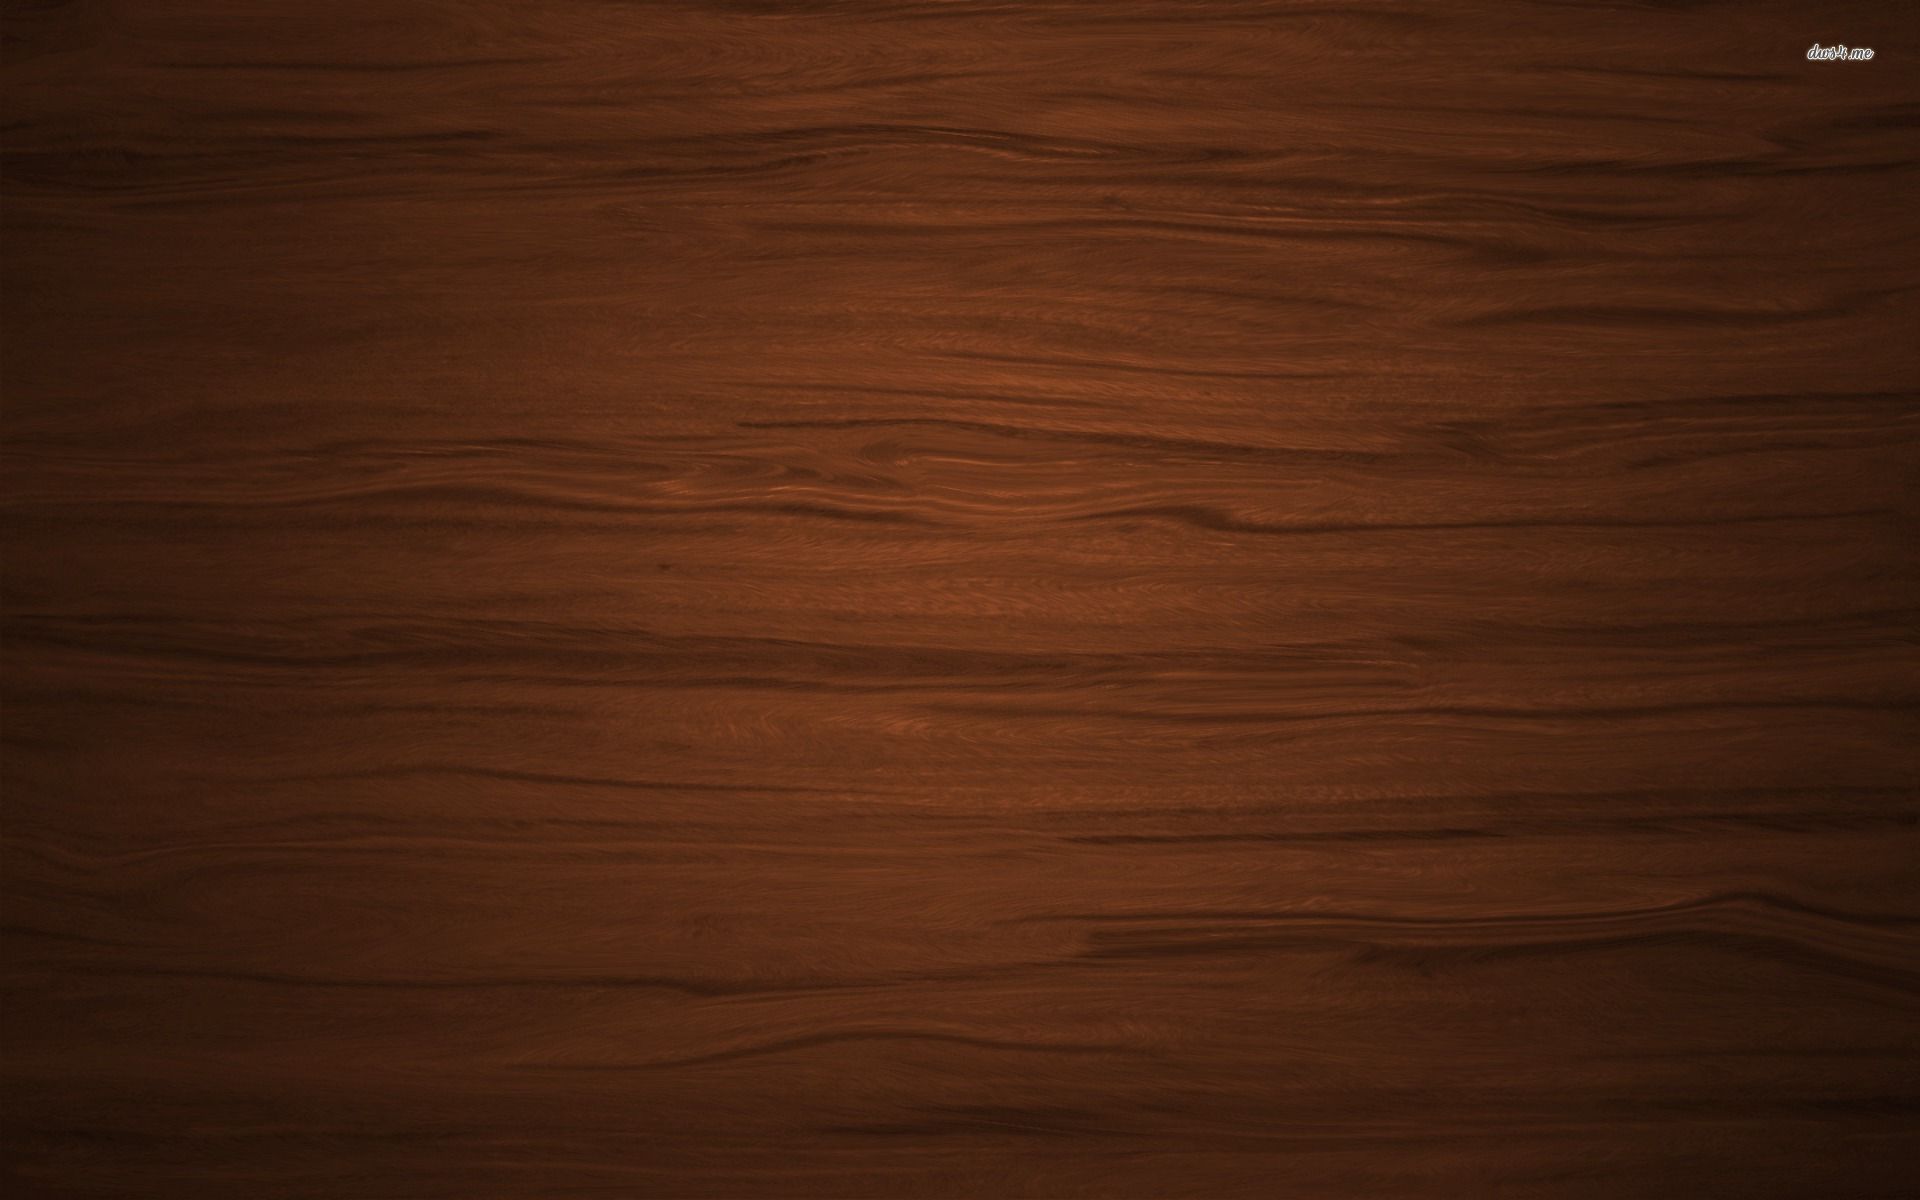 Wood texture wallpaper - Abstract wallpapers -